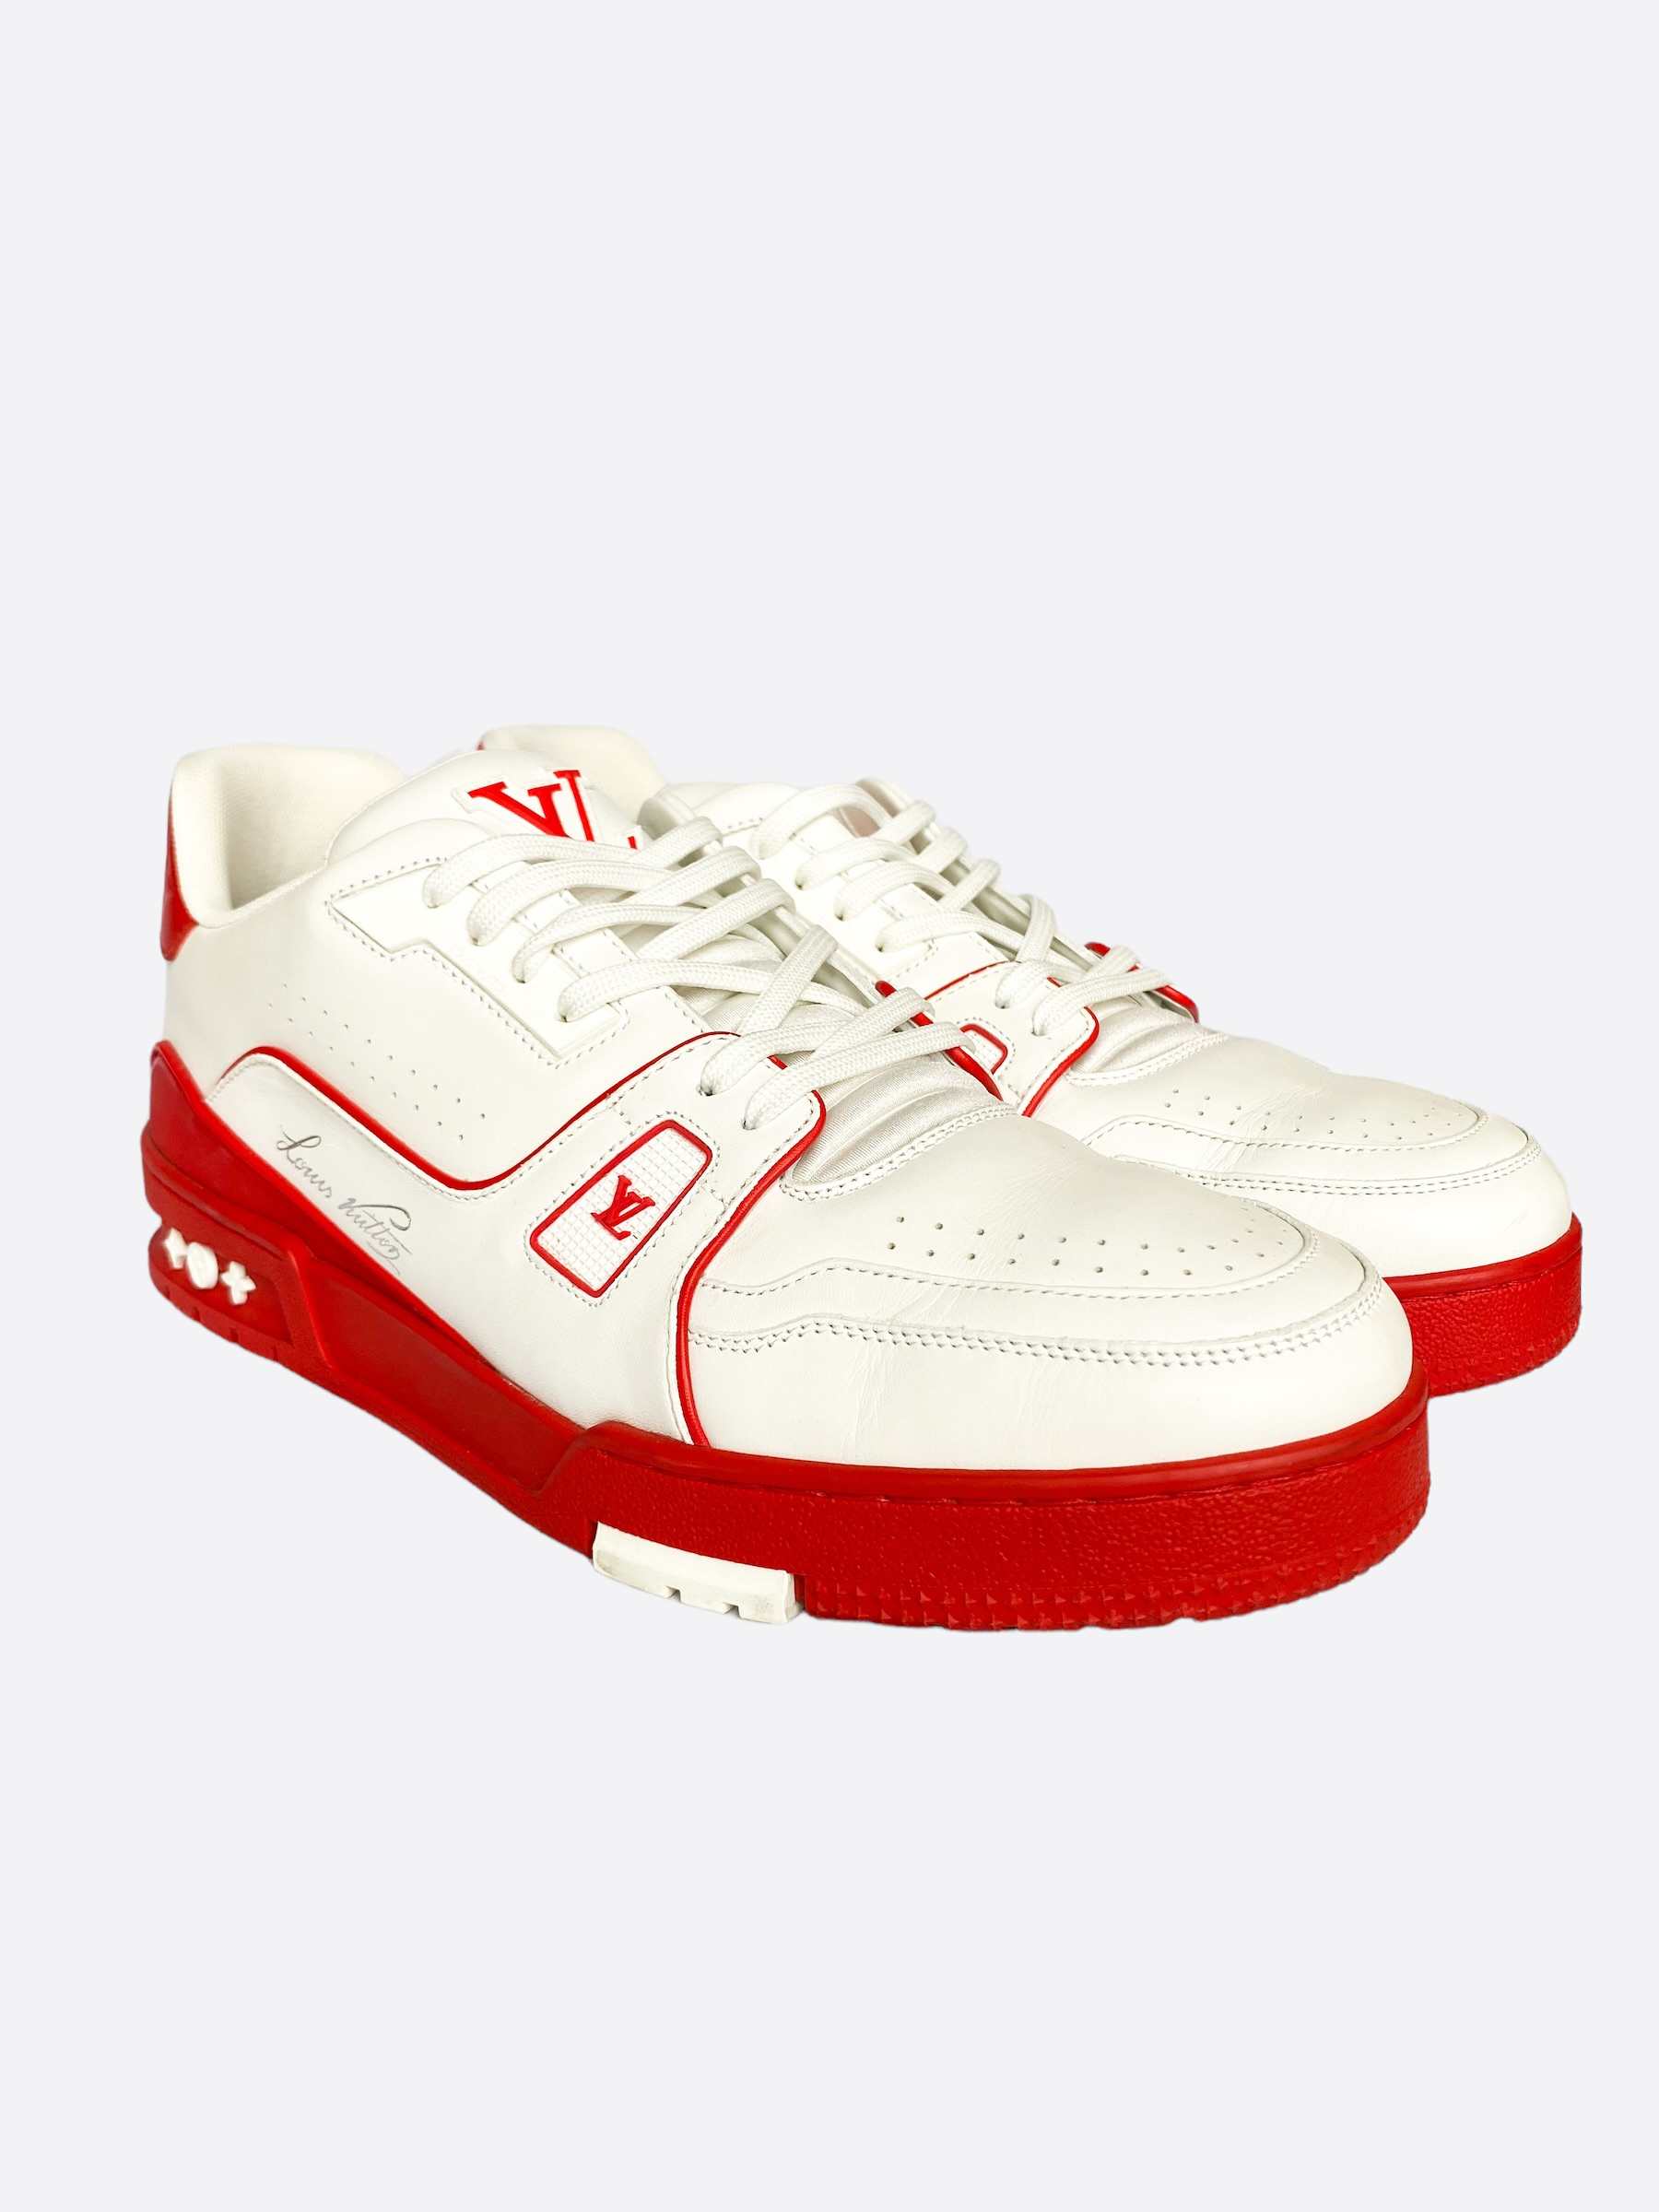 lv trainer red